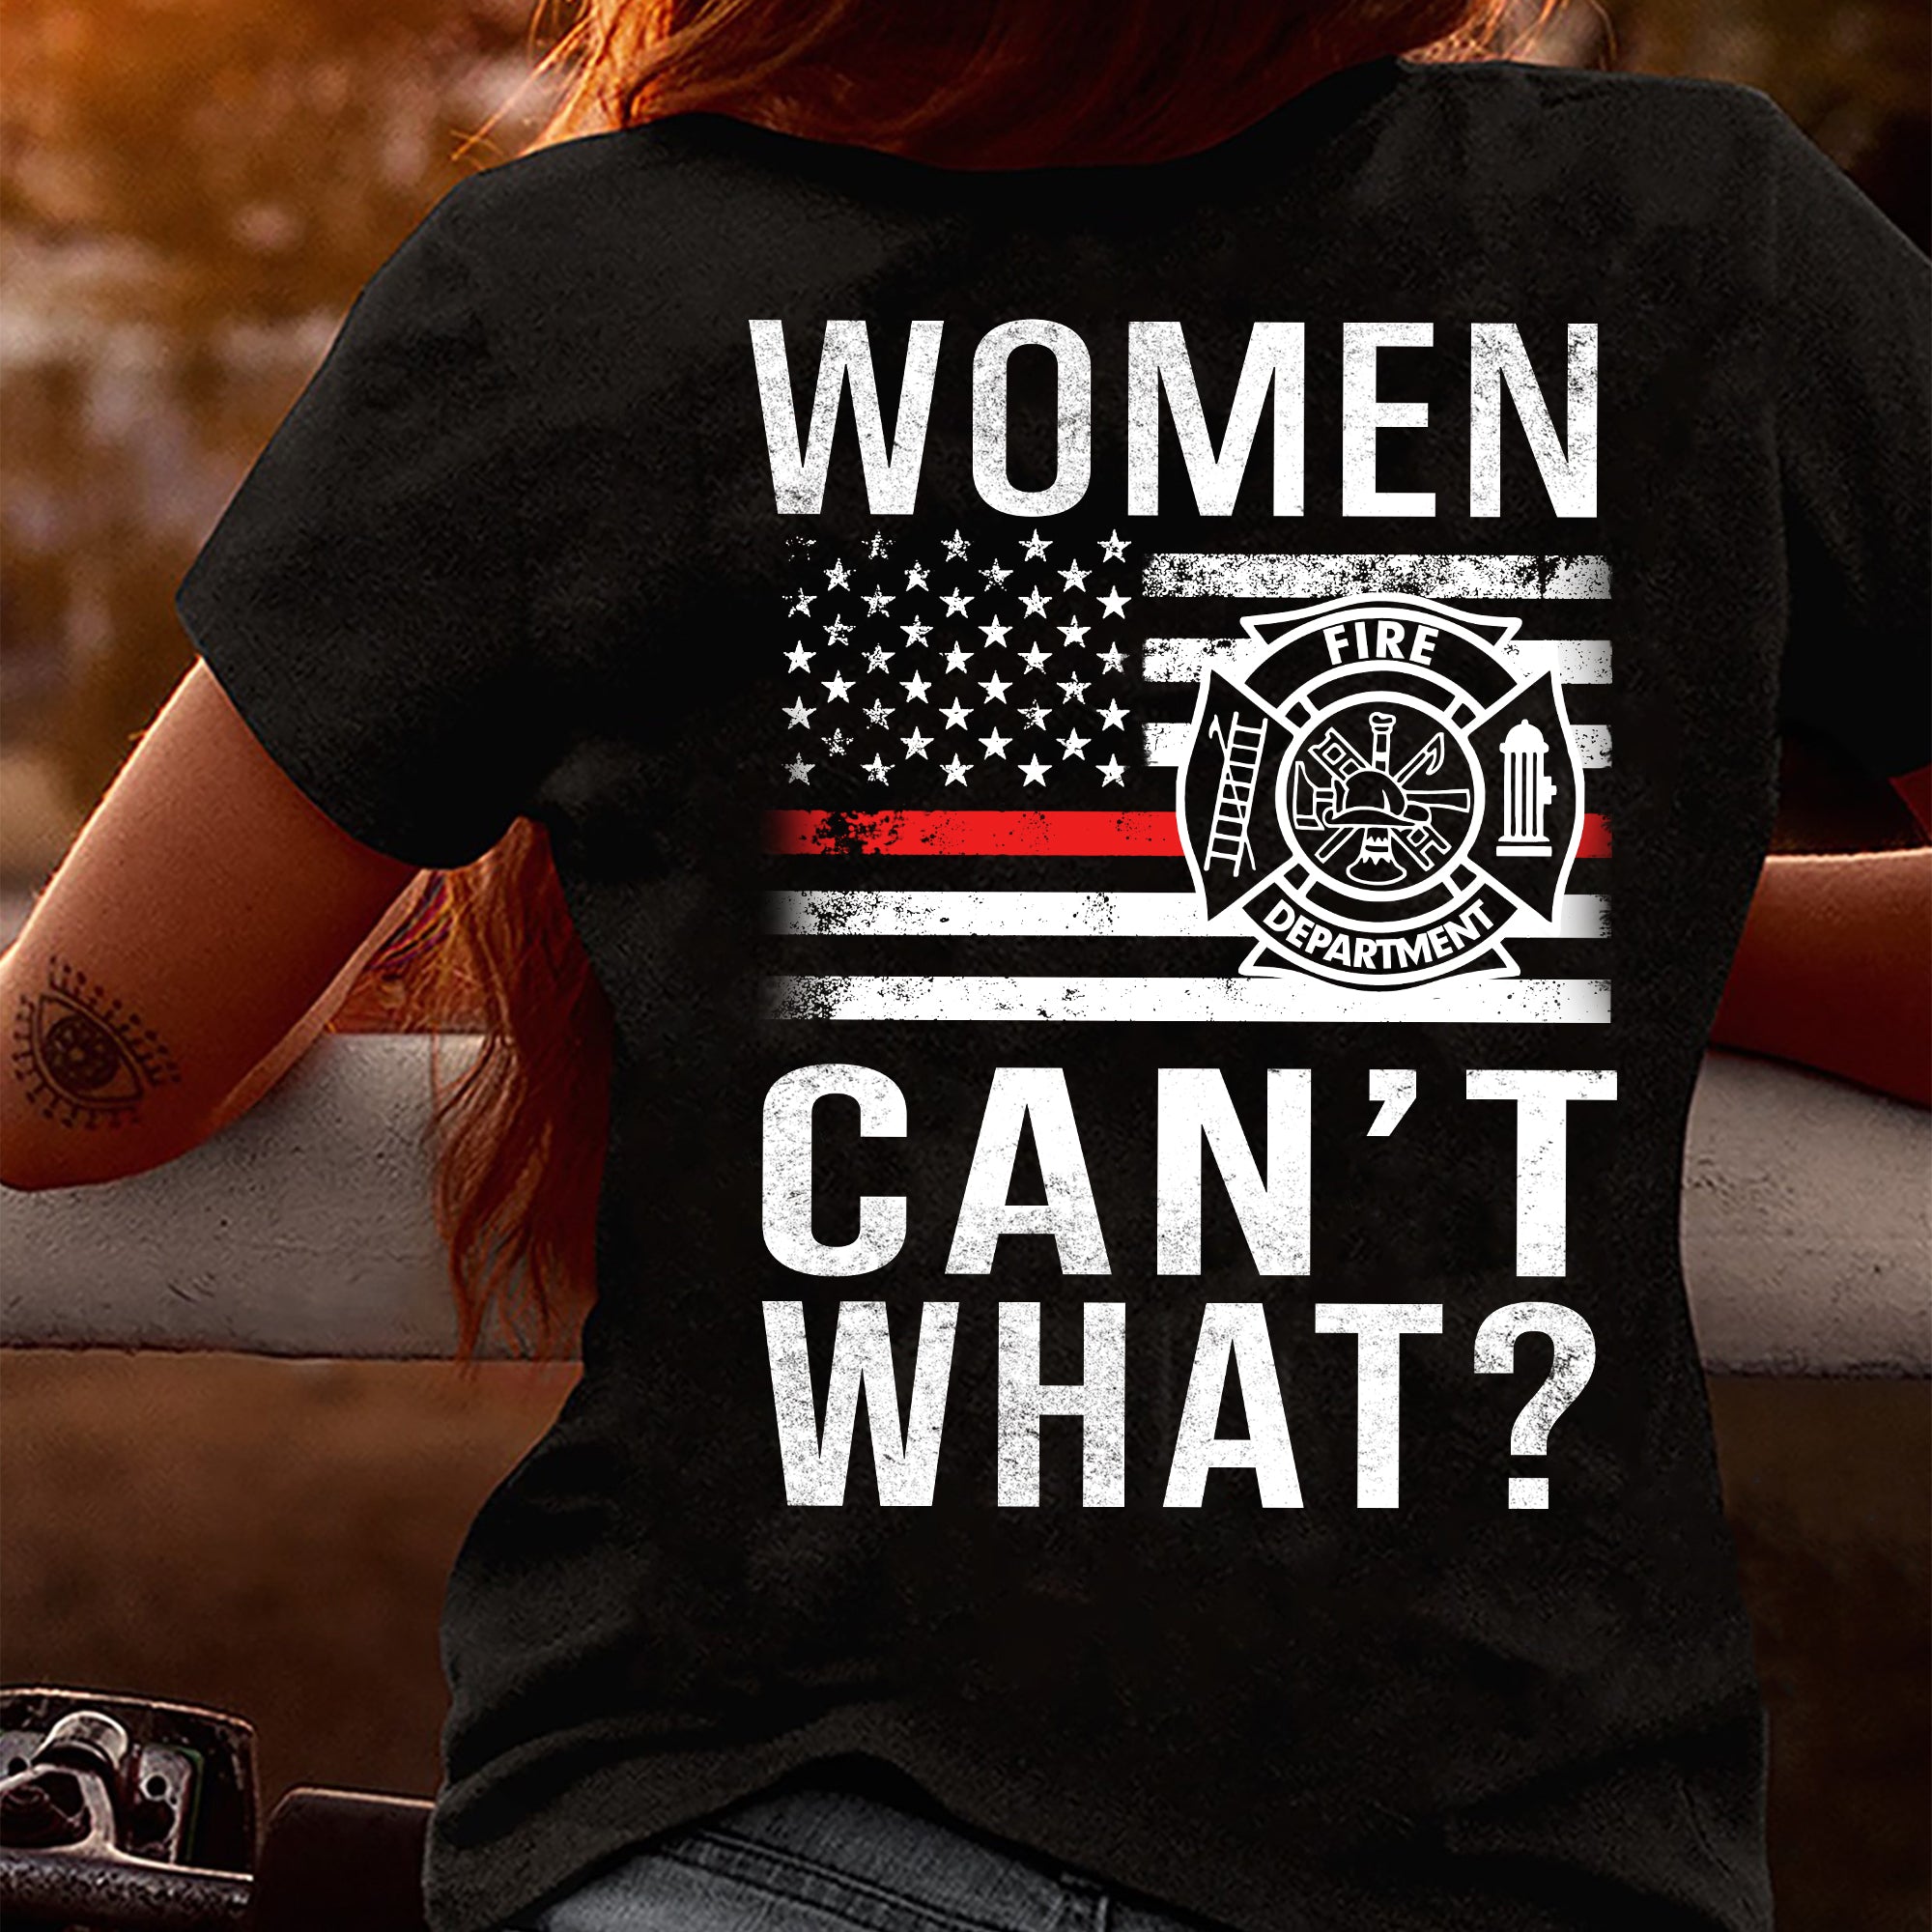 Women Can't What?